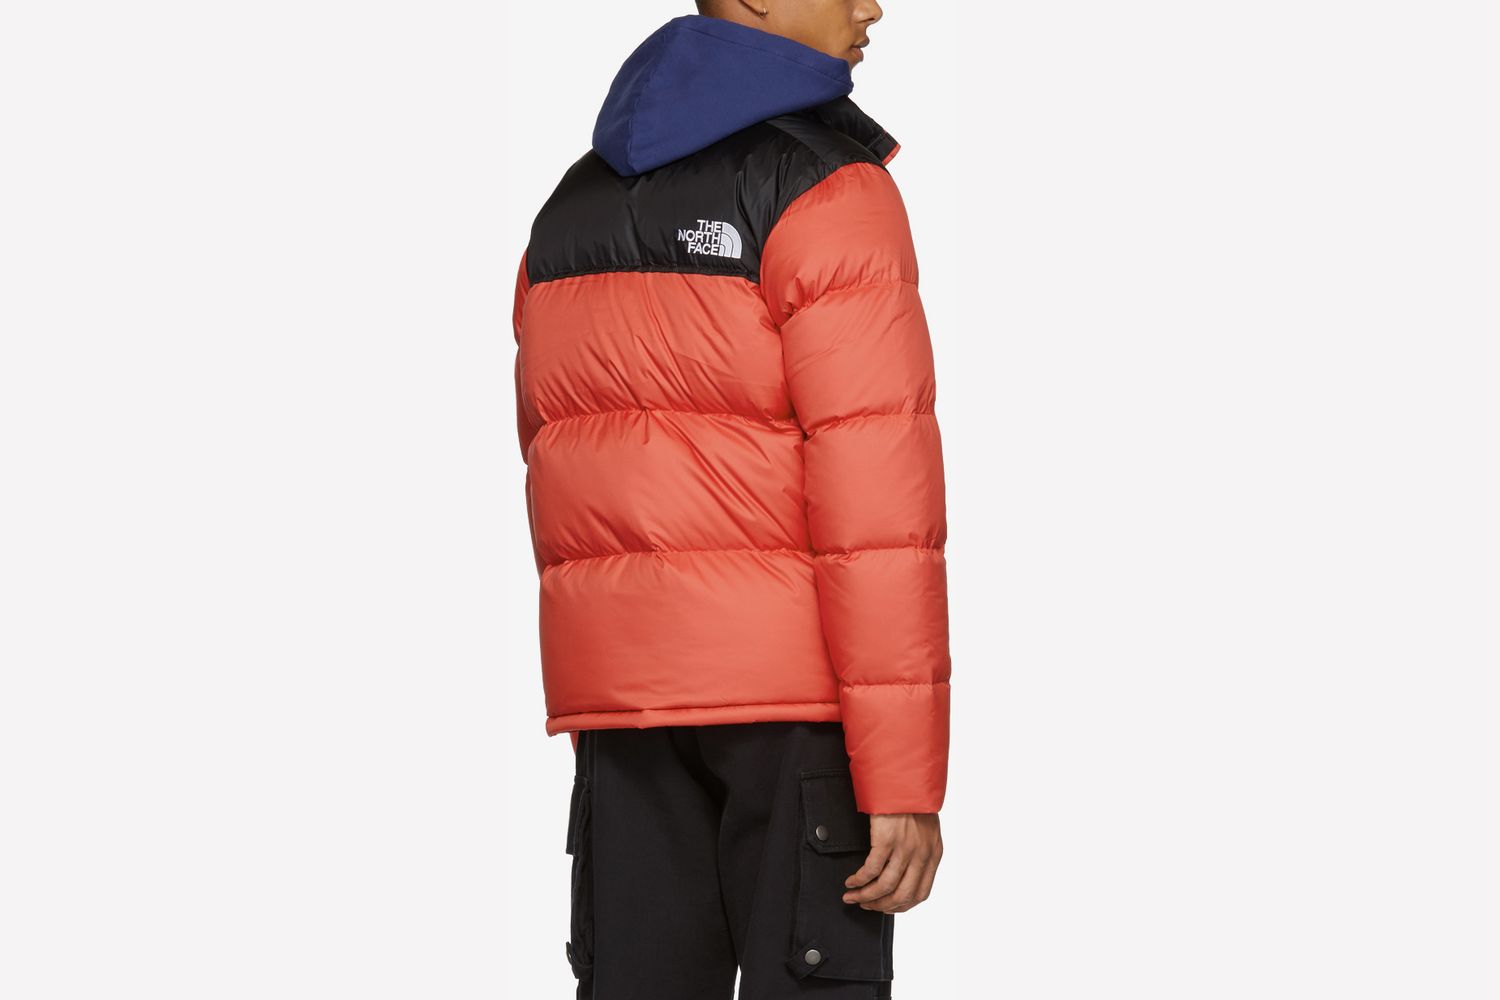 The North Face Just Dropped a New Baltro Light Jacket